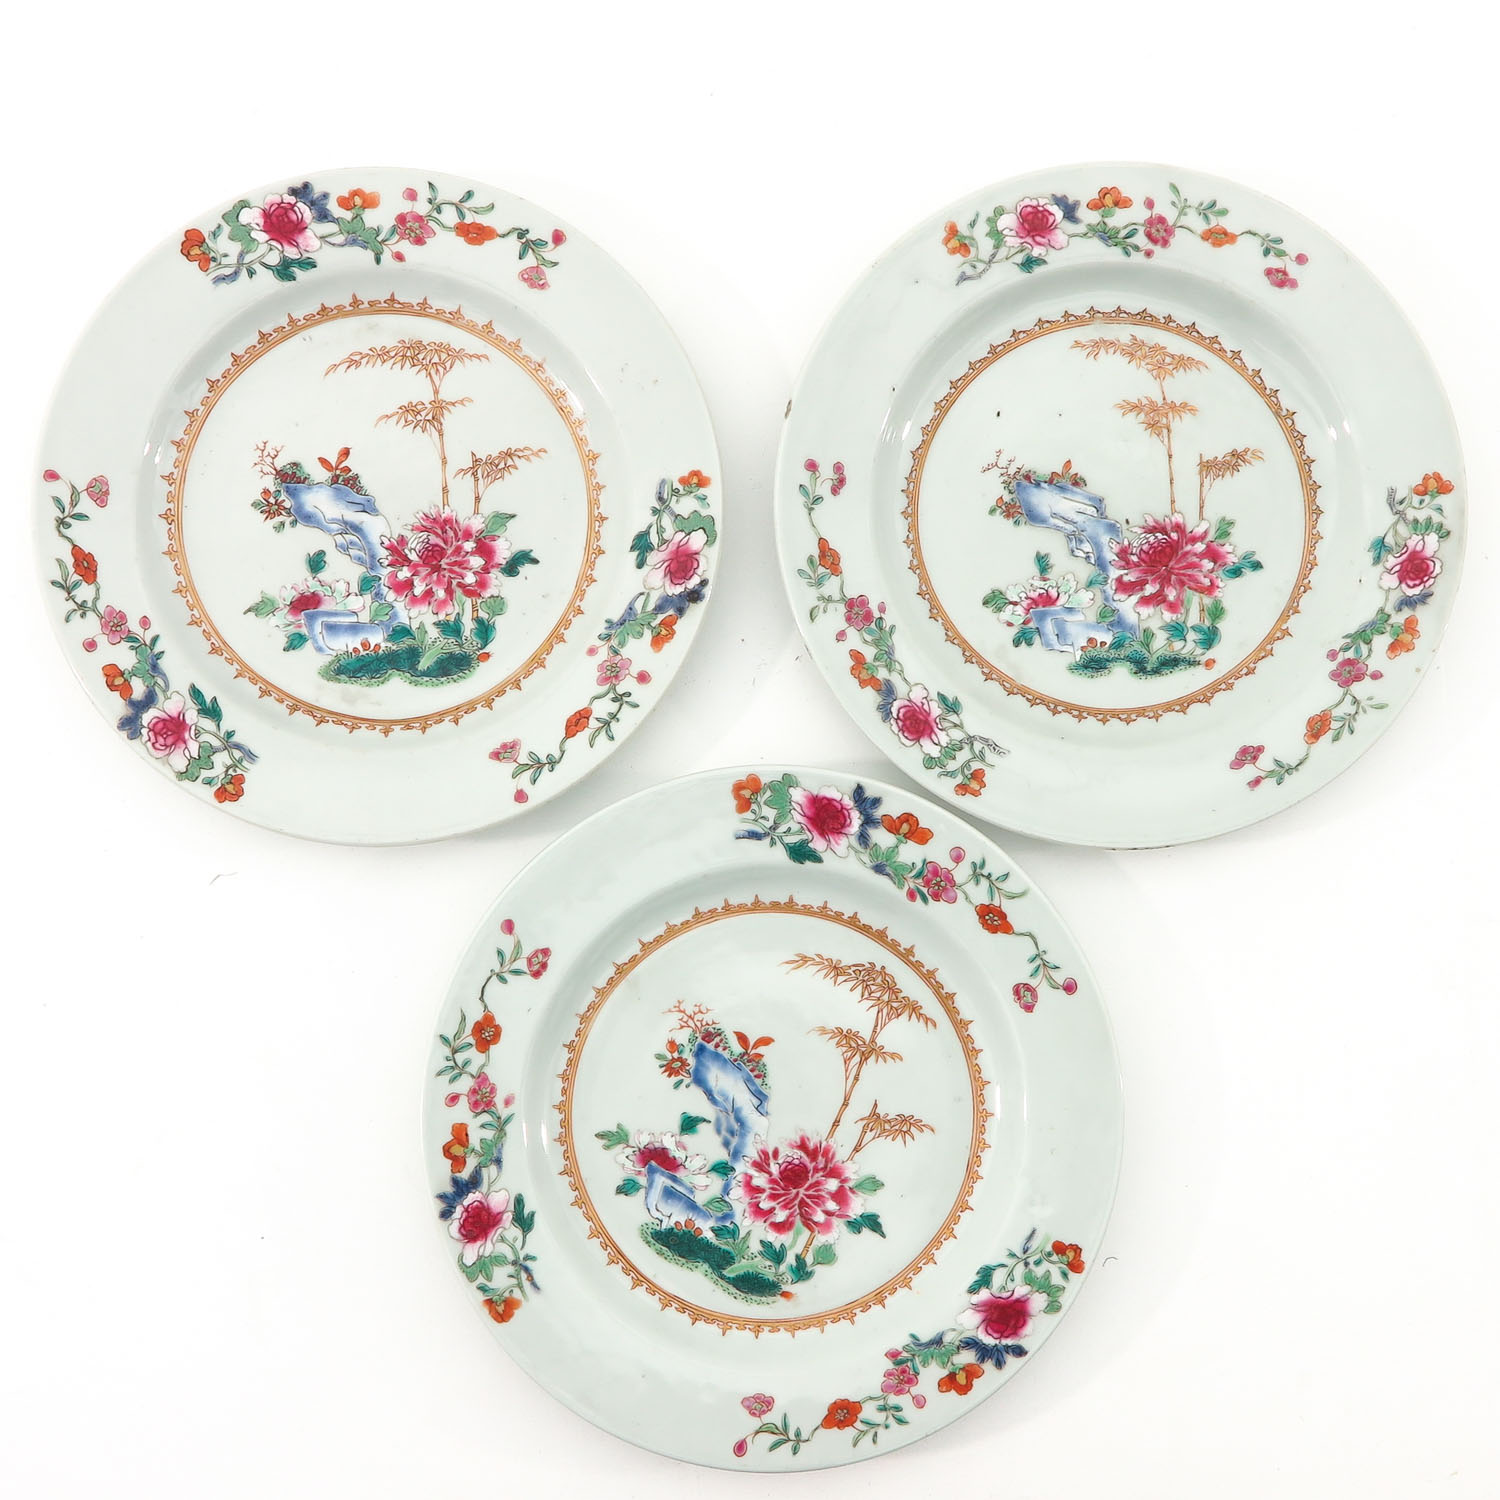 A Series of 8 Famille Rose Plates - Image 5 of 10